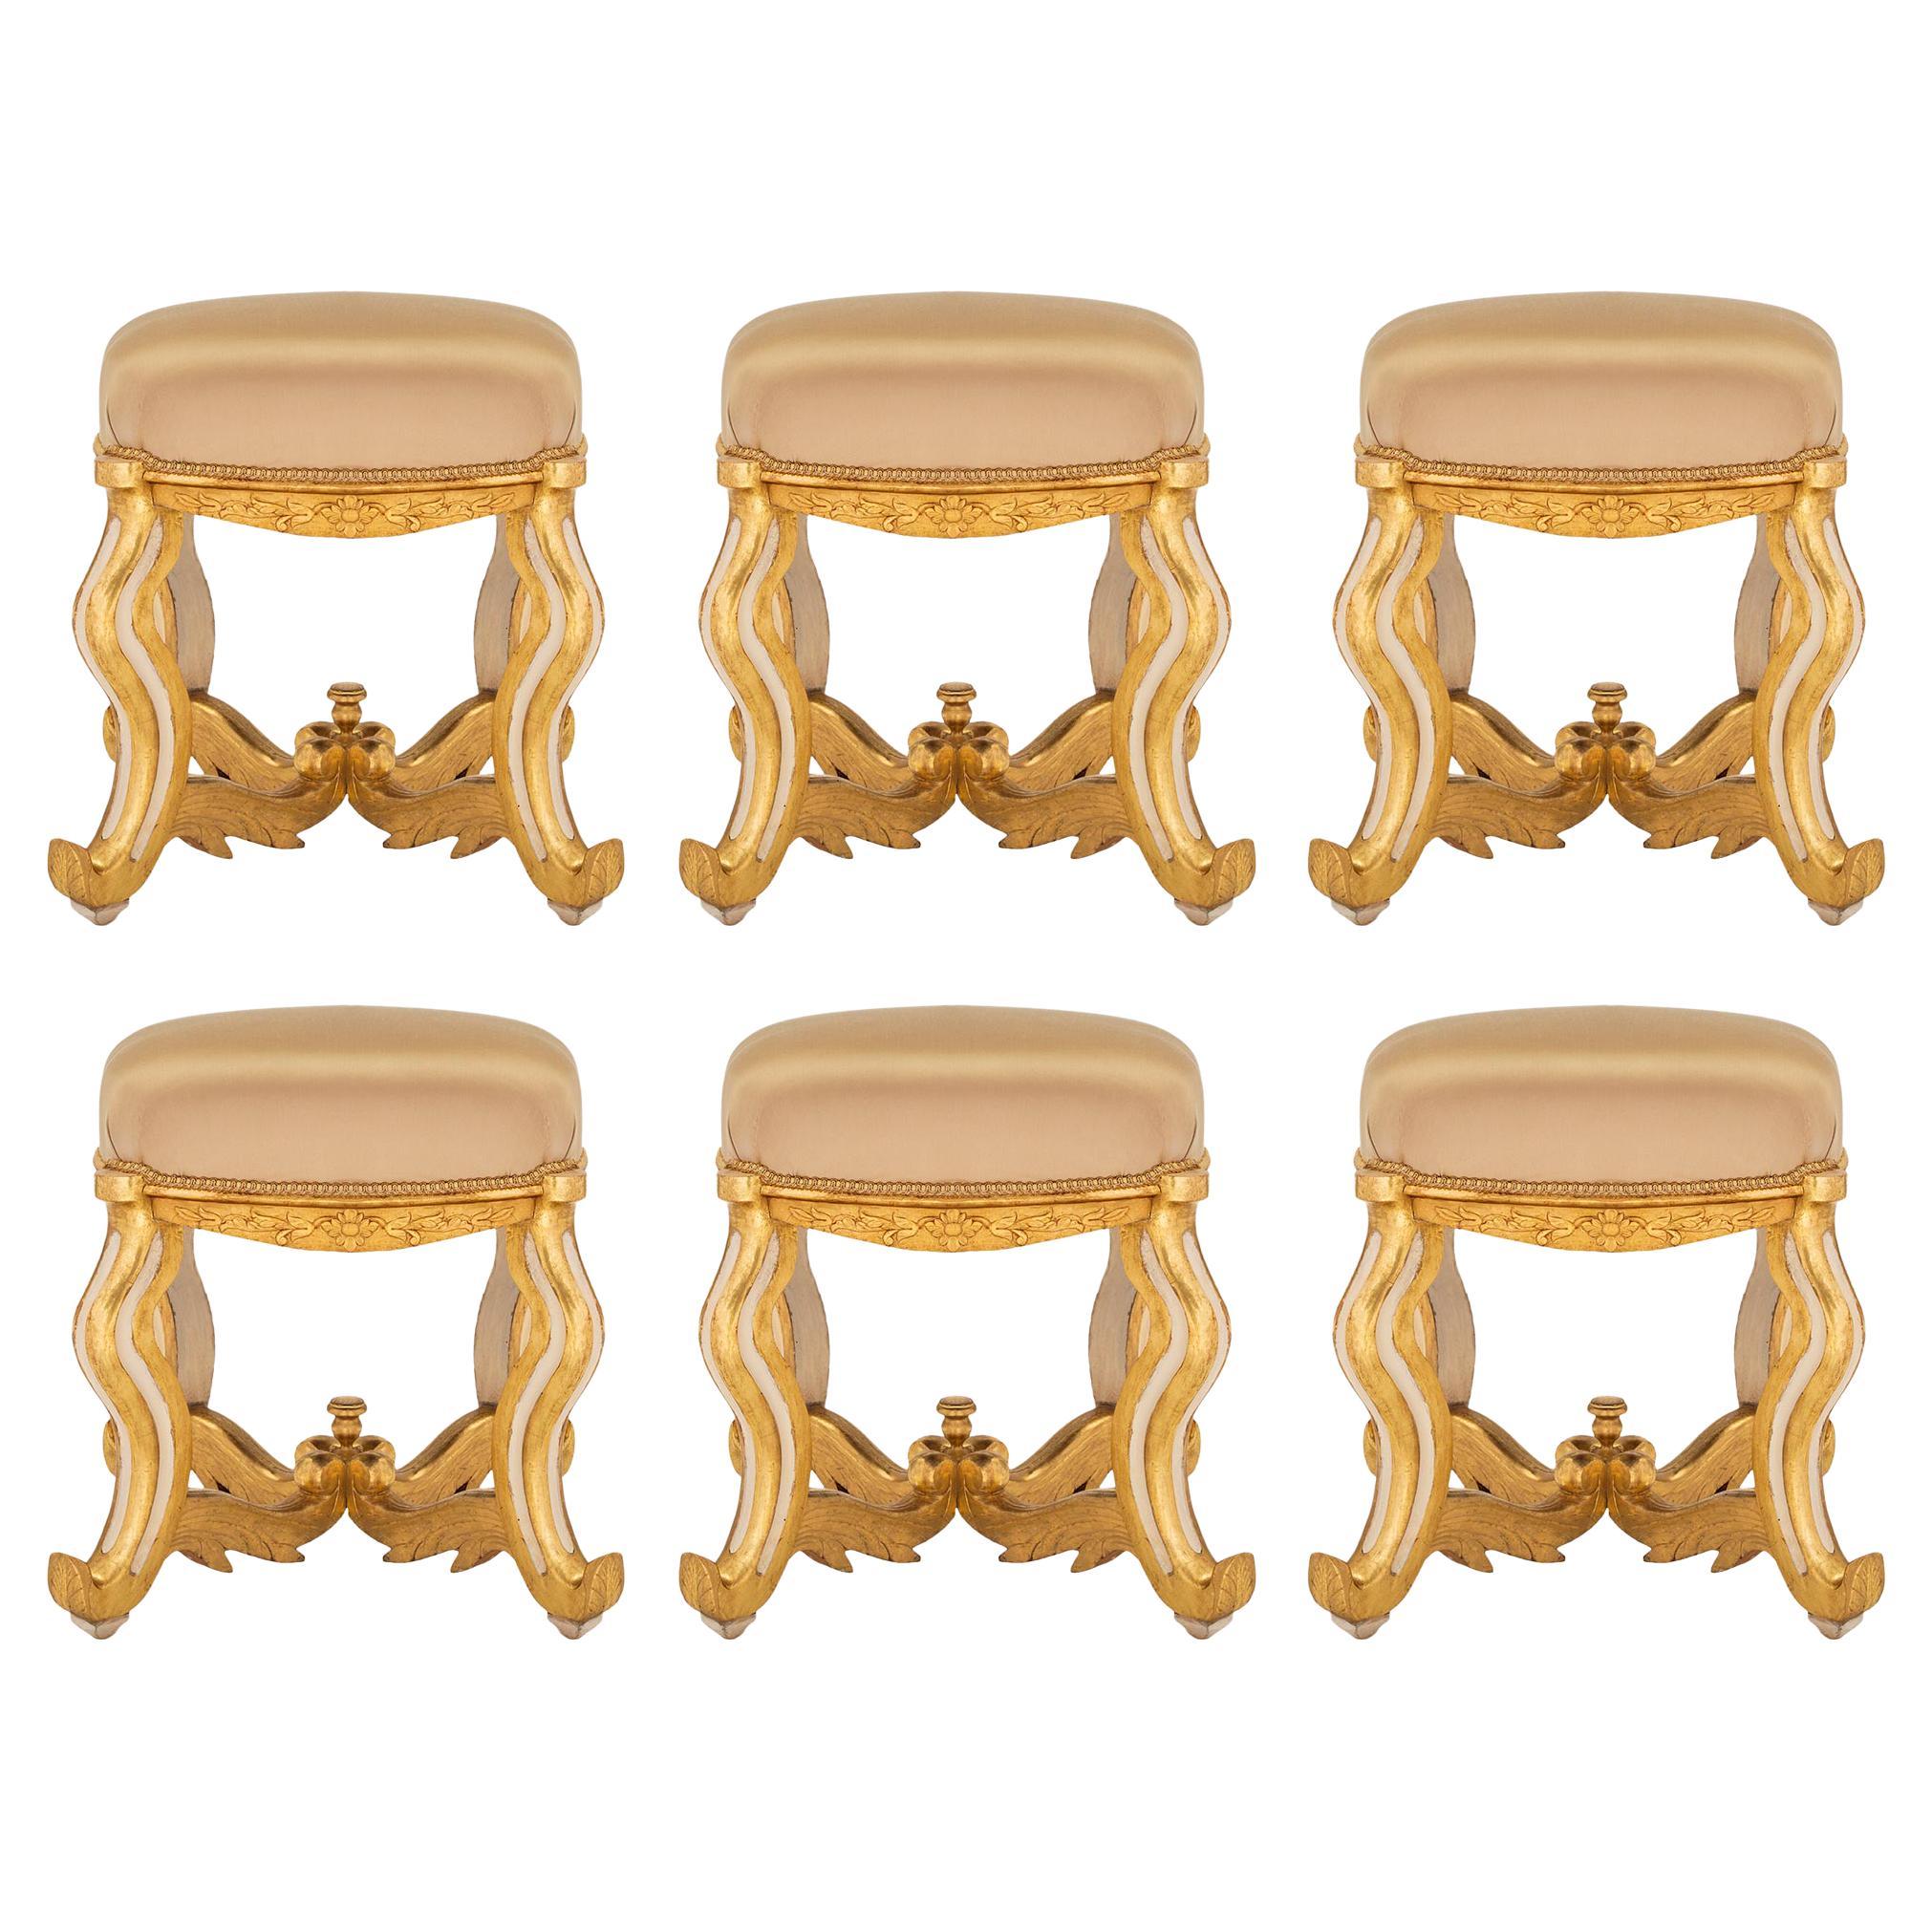 Set of Six Italian Late 18th-Early 19th Century Tuscan Stools For Sale